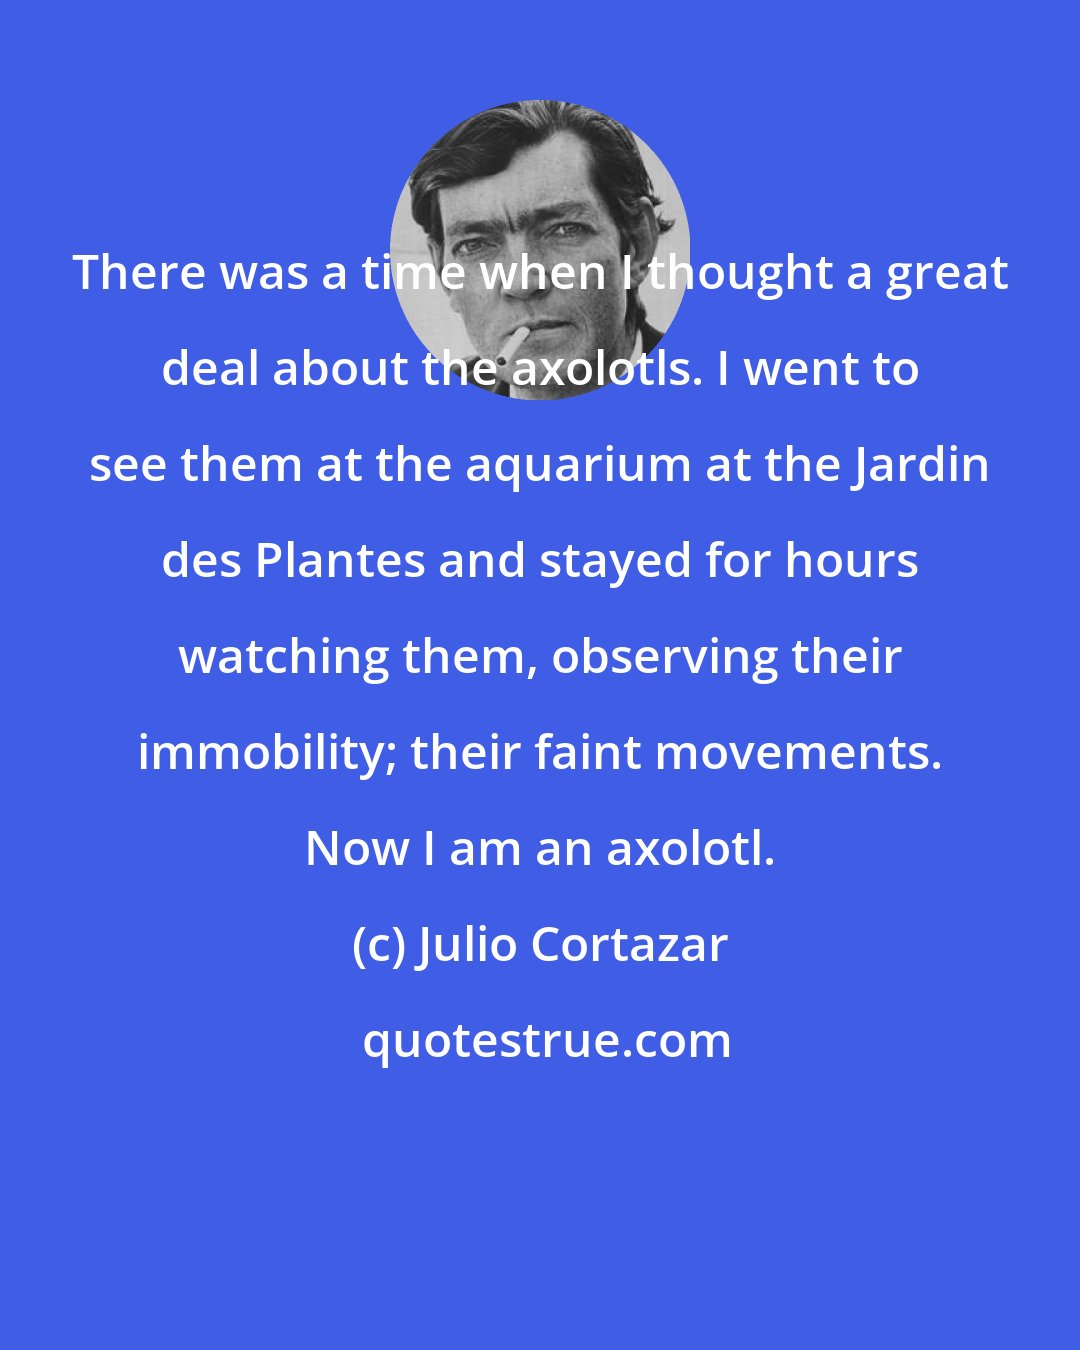 Julio Cortazar: There was a time when I thought a great deal about the axolotls. I went to see them at the aquarium at the Jardin des Plantes and stayed for hours watching them, observing their immobility; their faint movements. Now I am an axolotl.